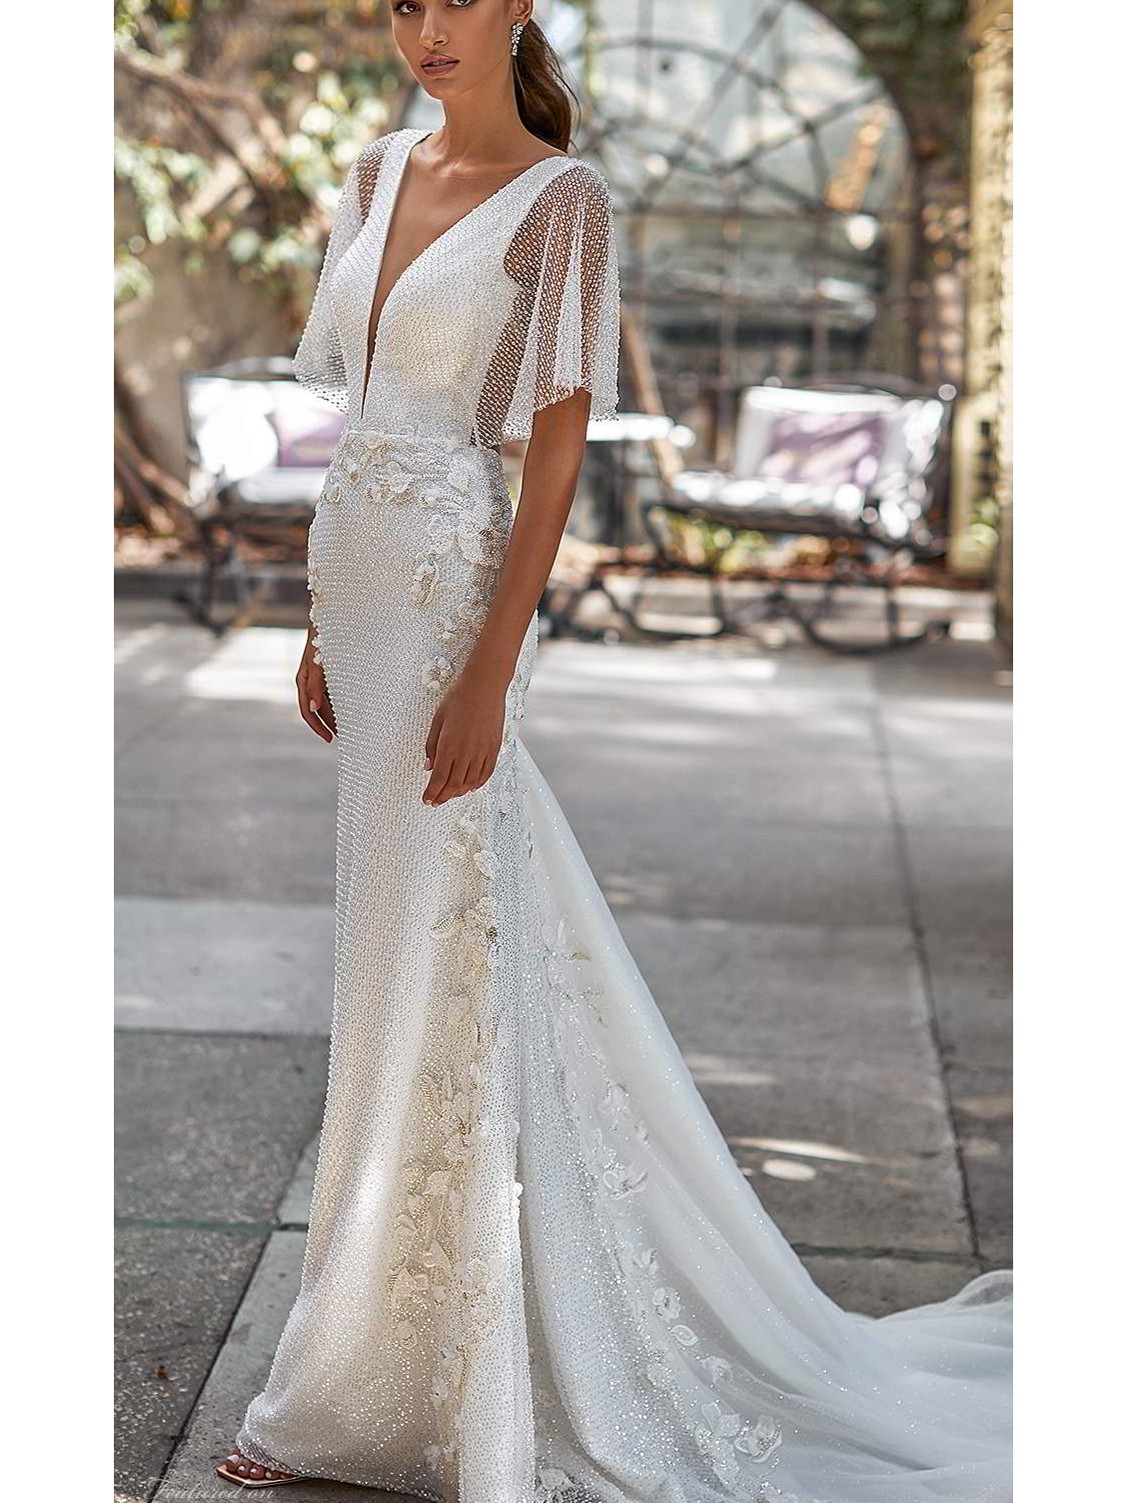 Dress 19 Inspirated By Katy Corso 2021 Wedding Dresses